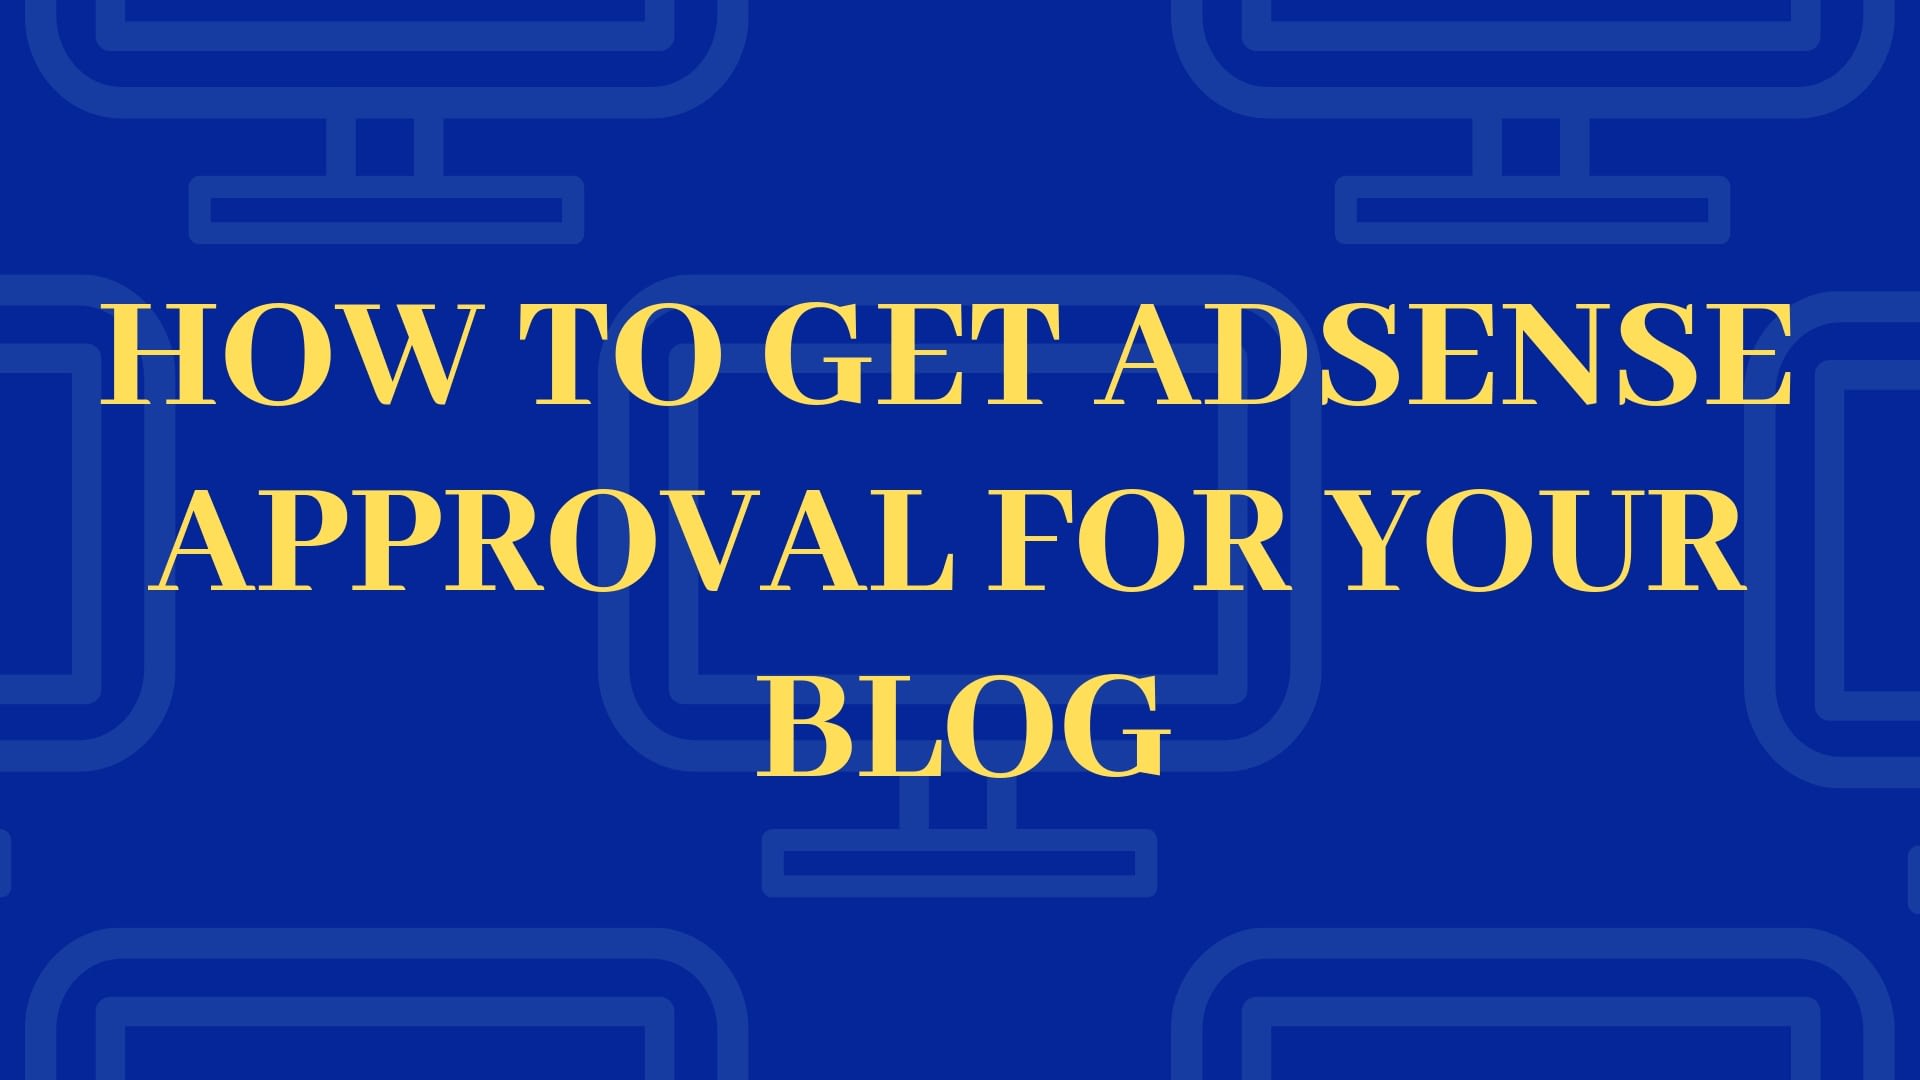 How to get Adsense Approval for blogger or BlogSpot.